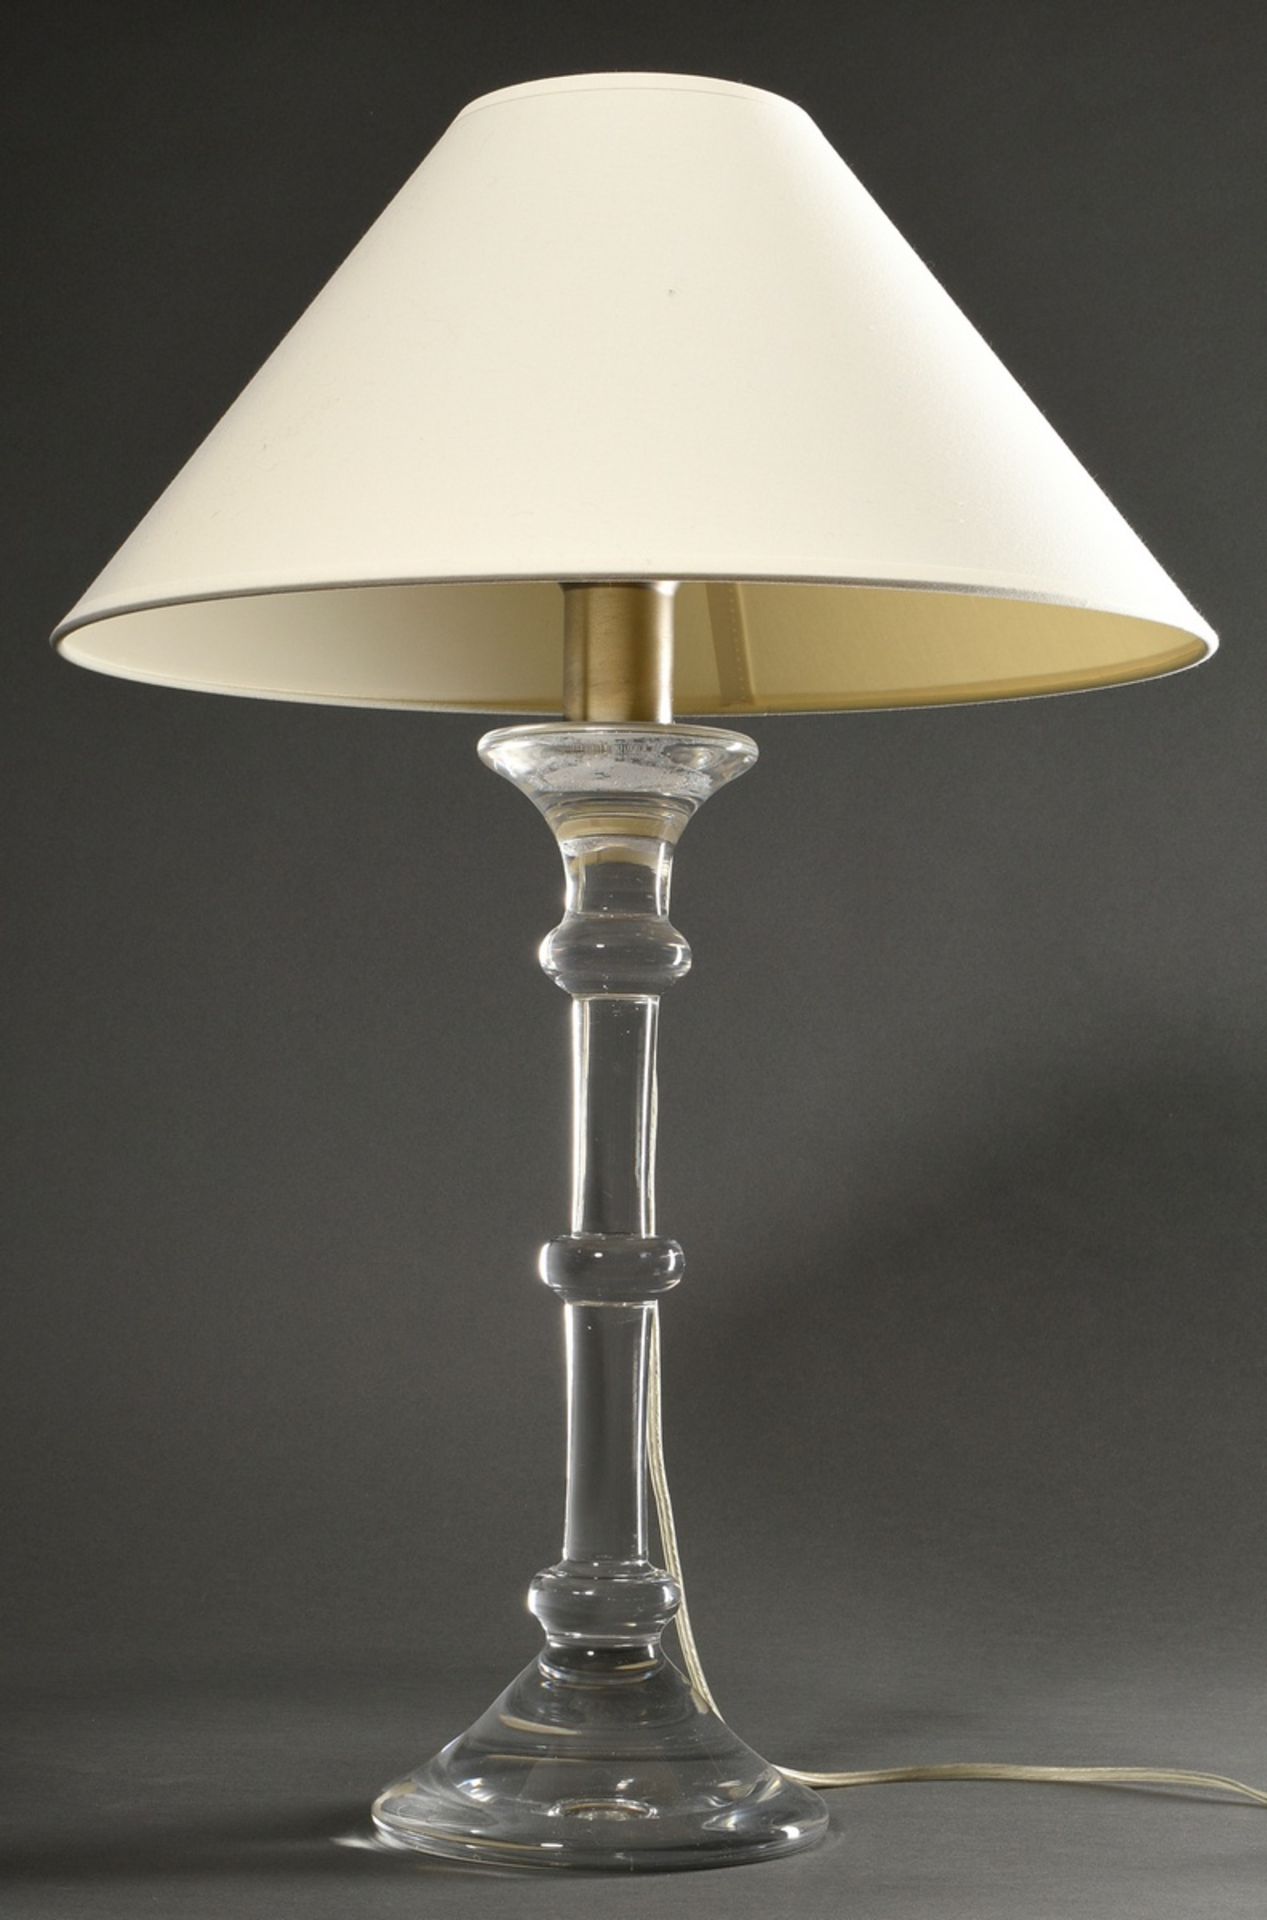 Table lamp "Tiffany" with glass shaft, designed by Ingo Maurer, 1969, h. 74cm